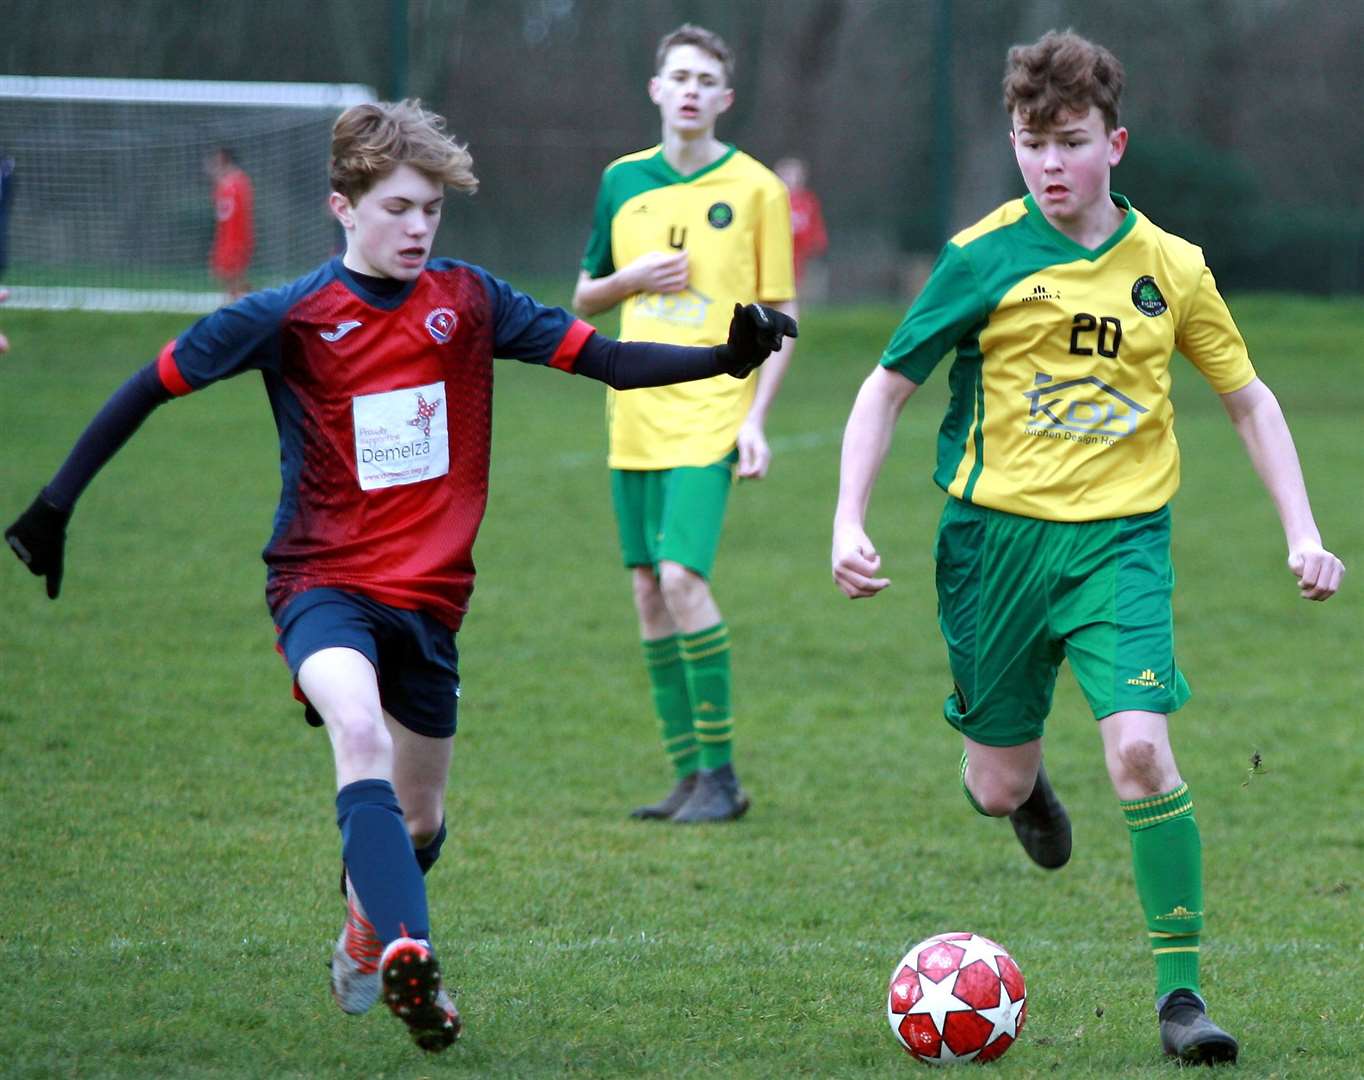 Hempstead Valley under-15s takes on Cliffe Woods Colts under-15s (green) on Sunday. Picture: Phil Lee FM26563261